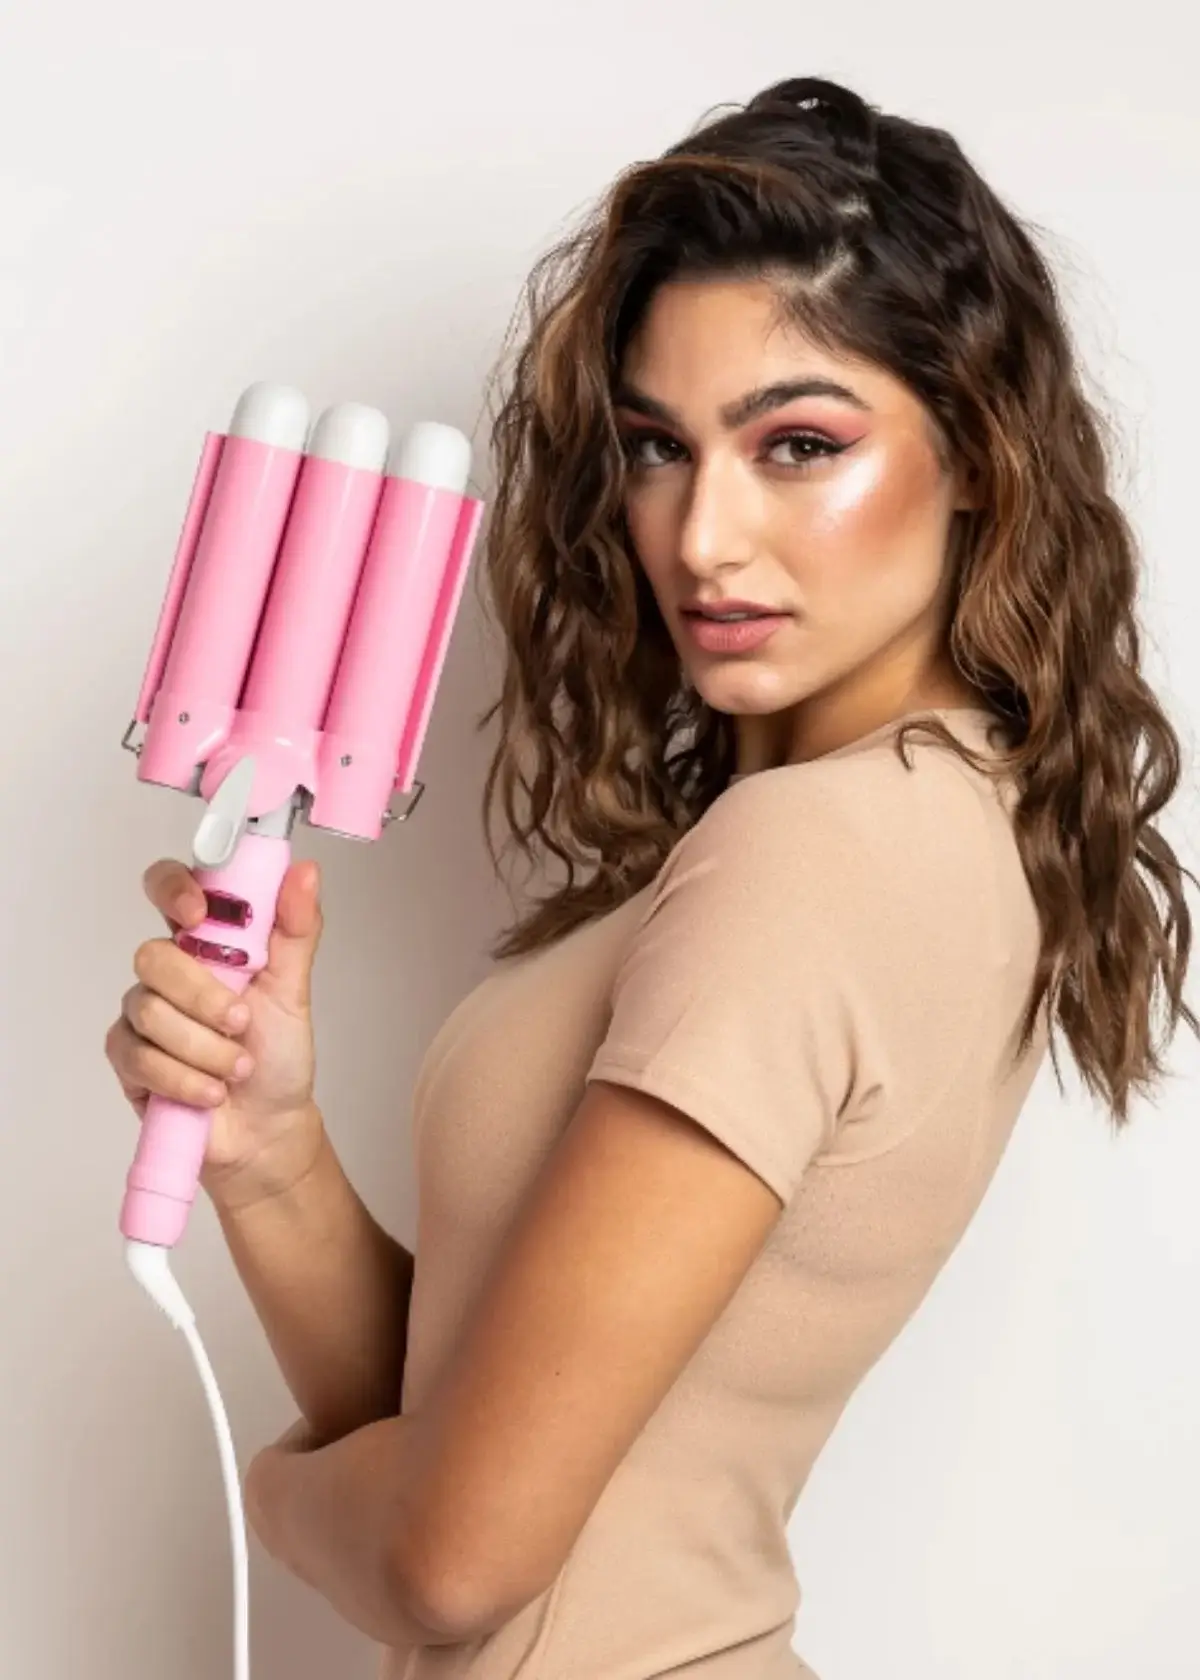 How to choose the right hair waver?